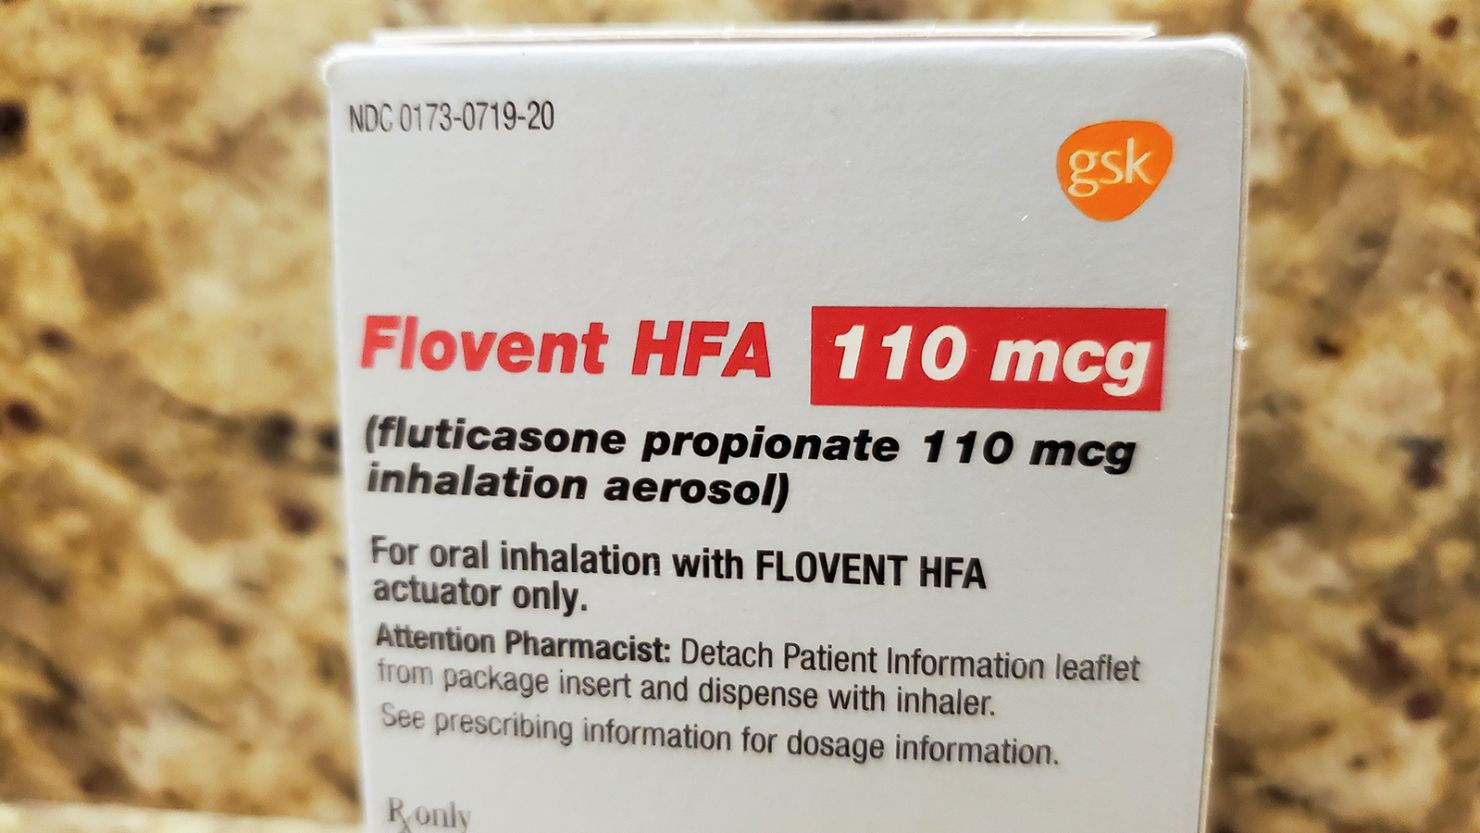 Flovent reduces inflammation in the airways of people with asthma. It was taken off the market in January and replaced with an identical generic, but insurance doesn't always cover the new option.